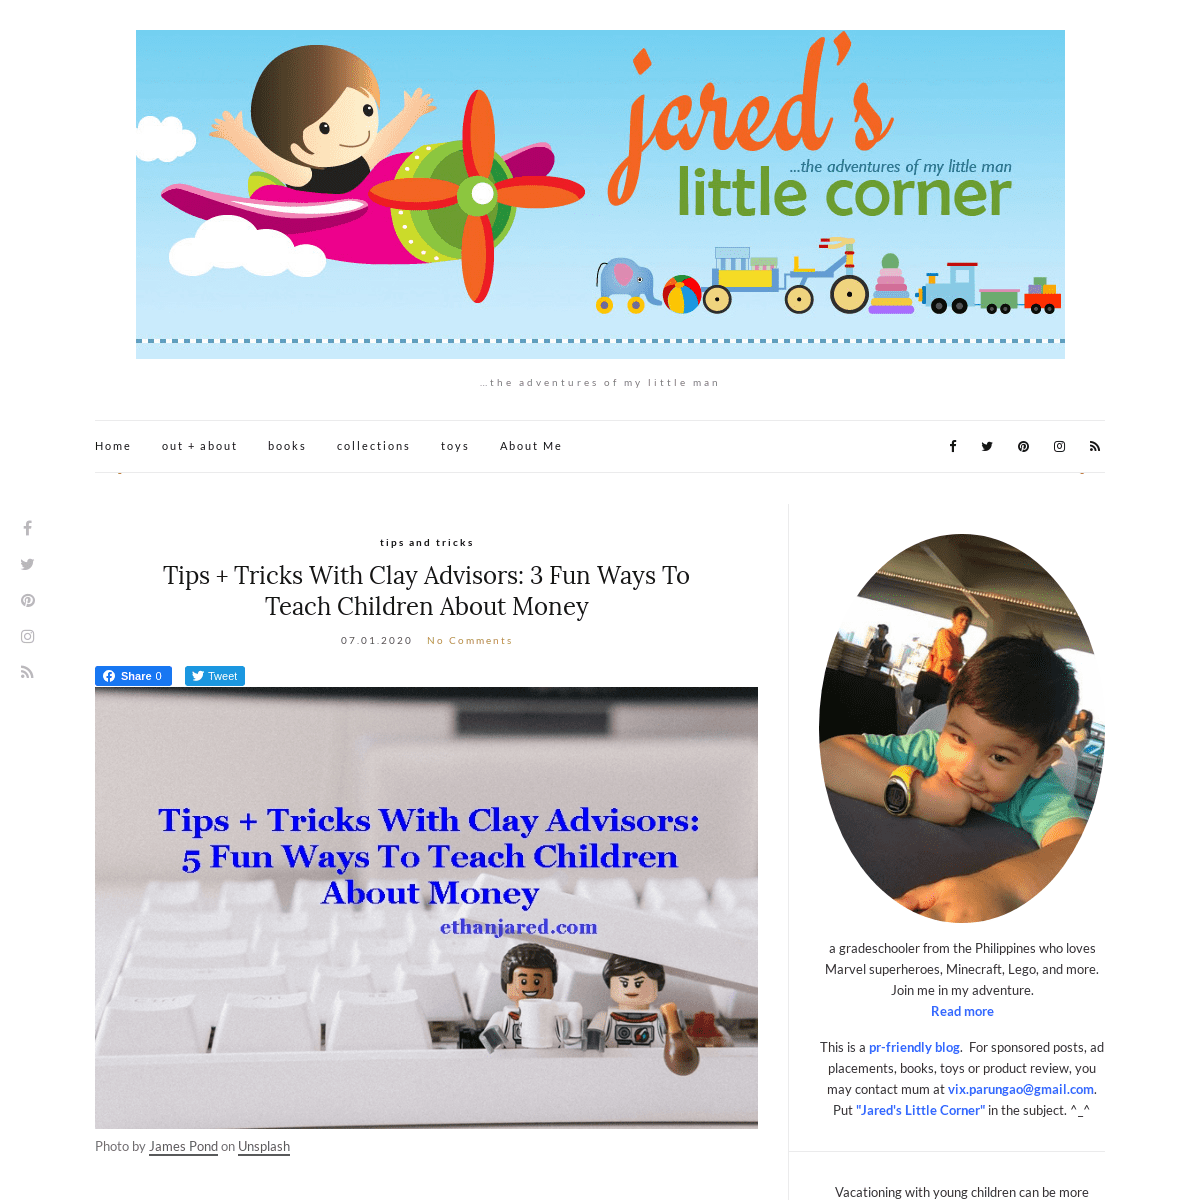 A complete backup of ethanjared.com